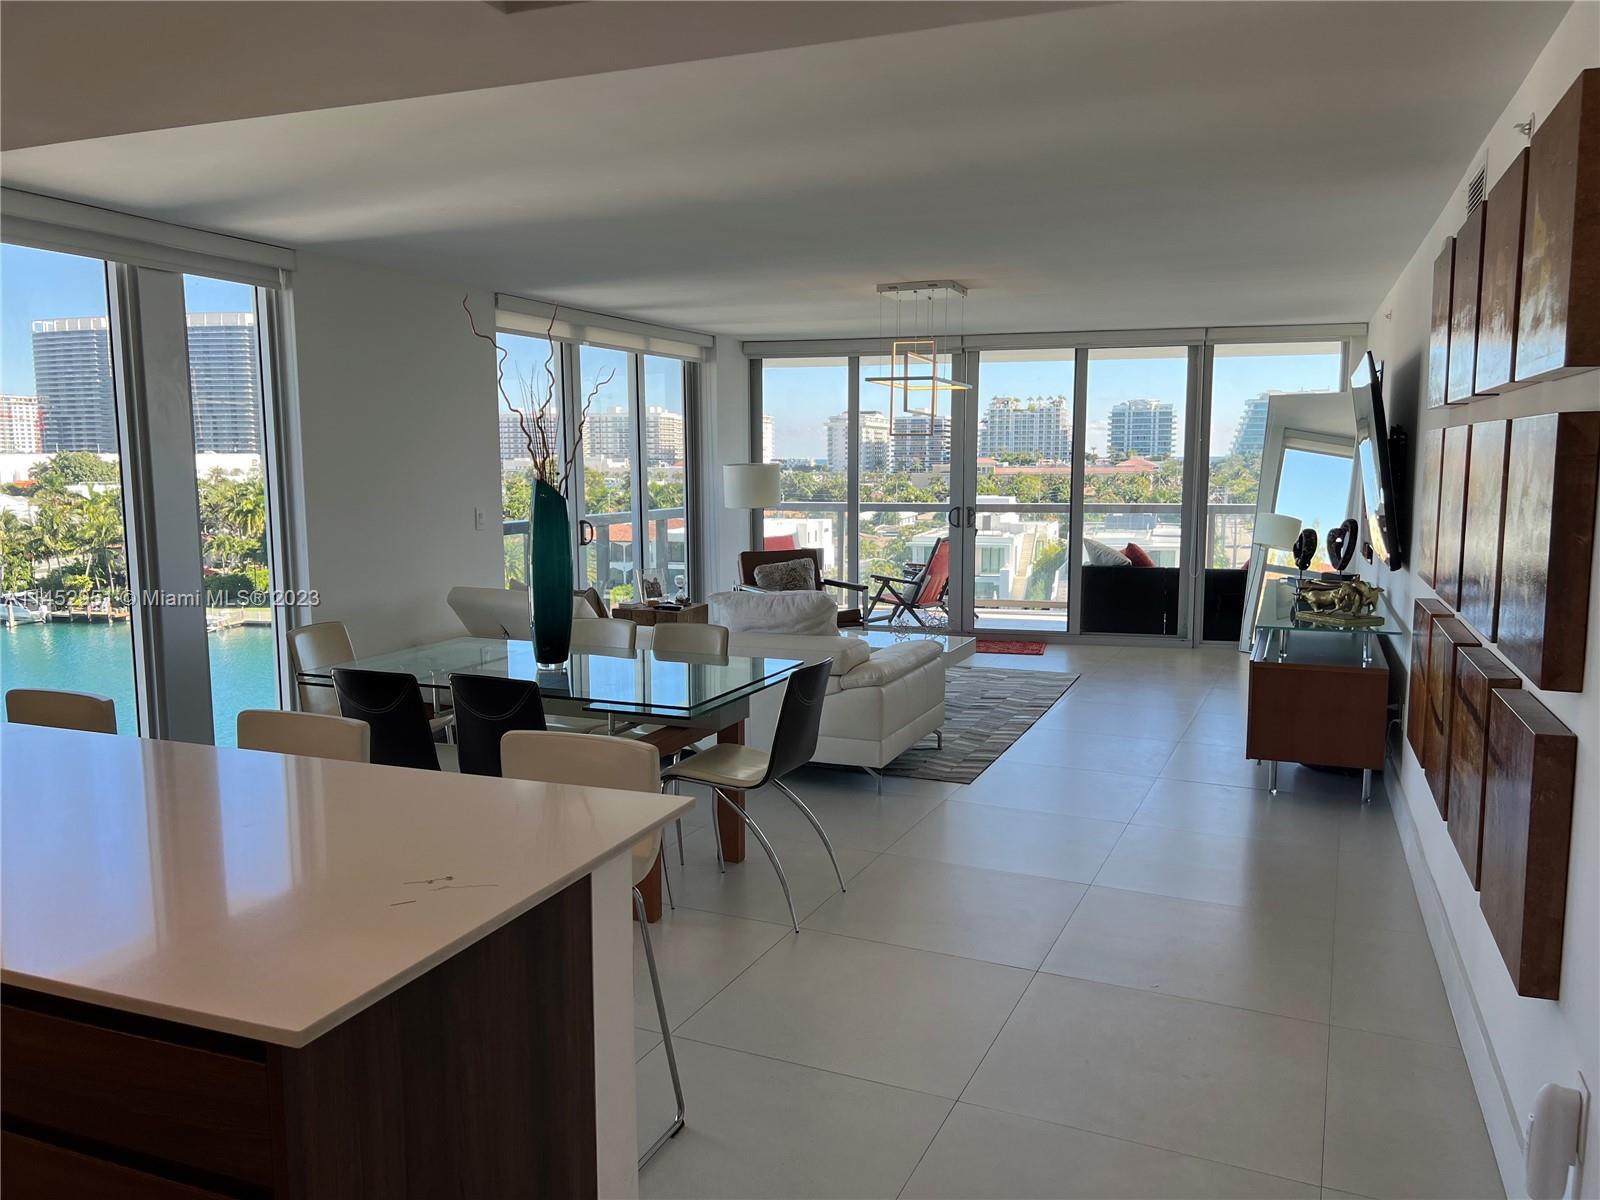 A most lovely corner unit, full of light, so spacious . Many windows make the water colors of the direct water view , a perfect setting .  Rooms are spacious , den can easily be made into a 3rd bedroom and there are 3 full baths.  A pleasure to show . Boutique , new cosntruction , awesome rooftop pool. Short term allowed.